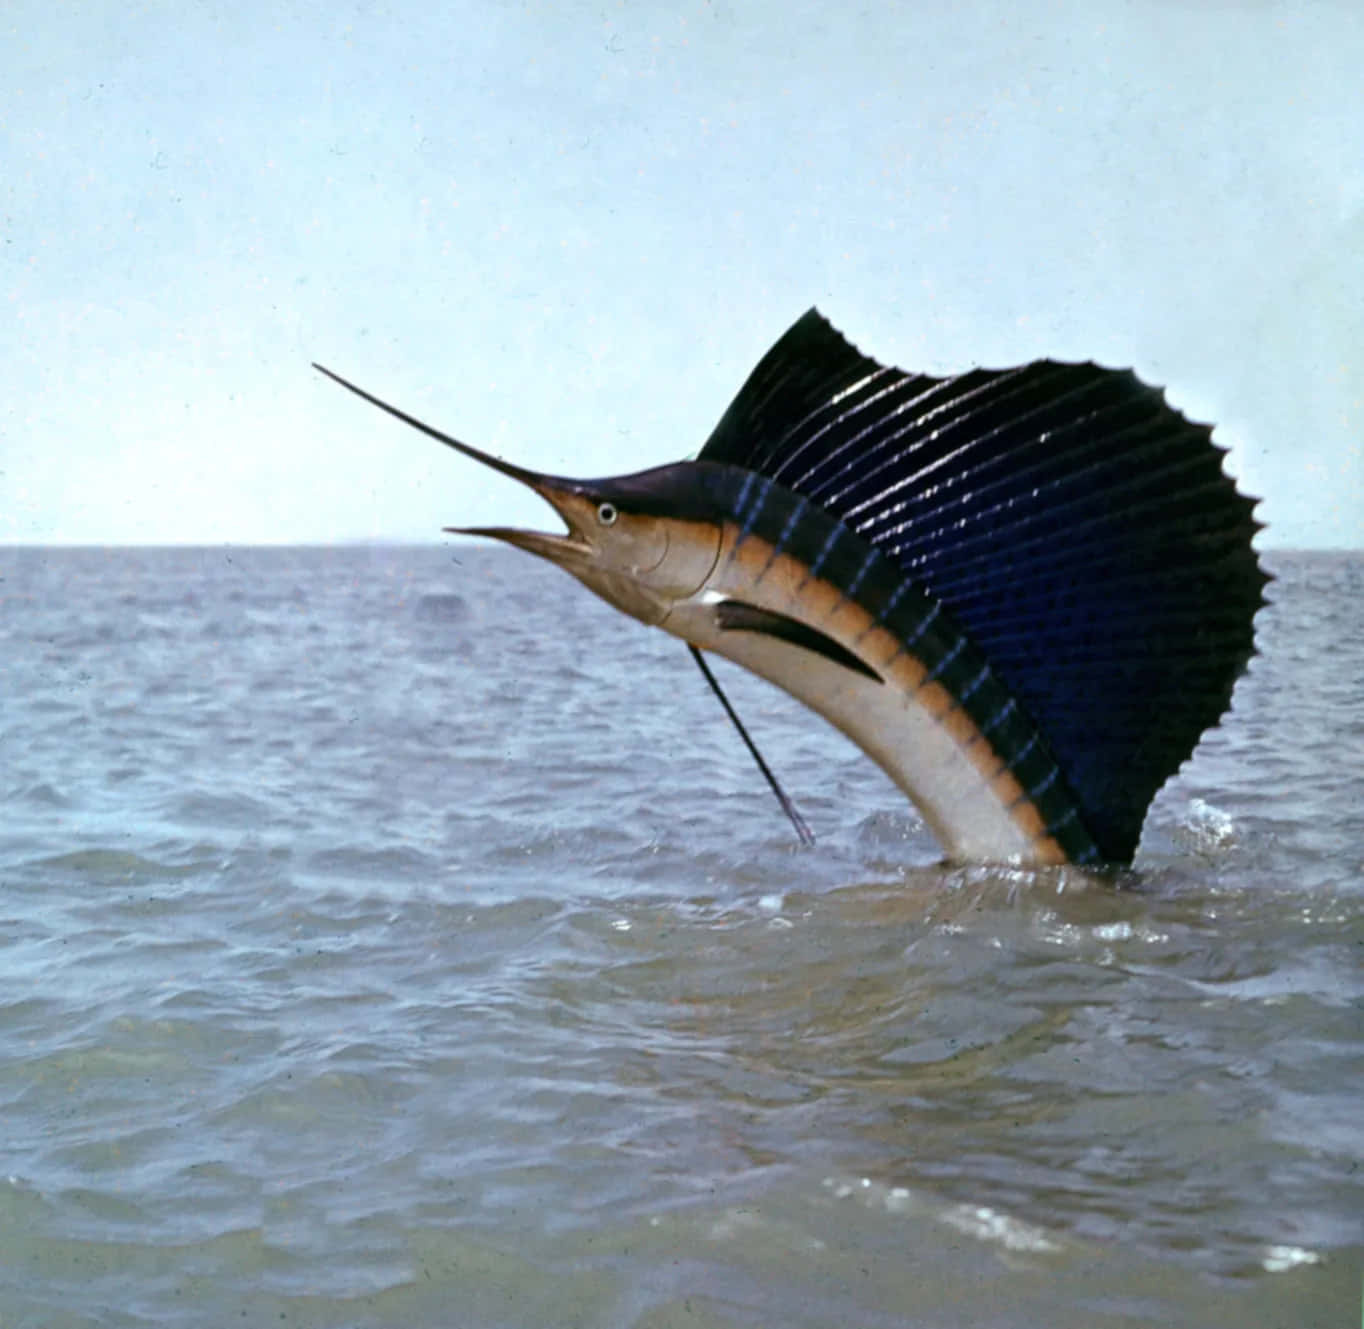 Sailfish leaping out of the ocean water